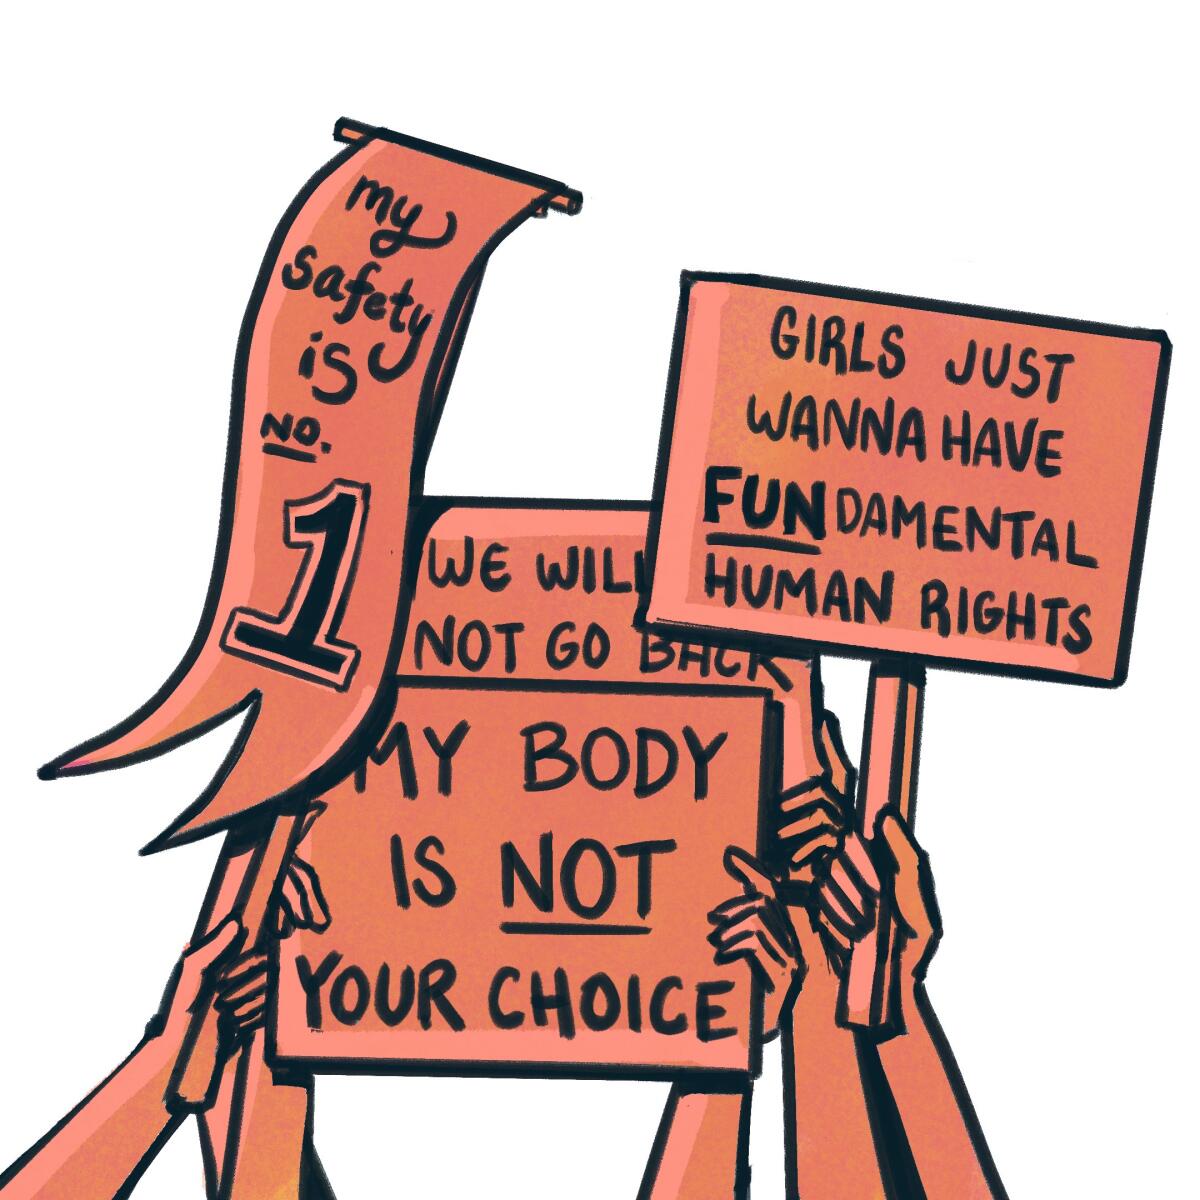 Illustration of several hands holding protest signs with messages like "My body is not your choice"